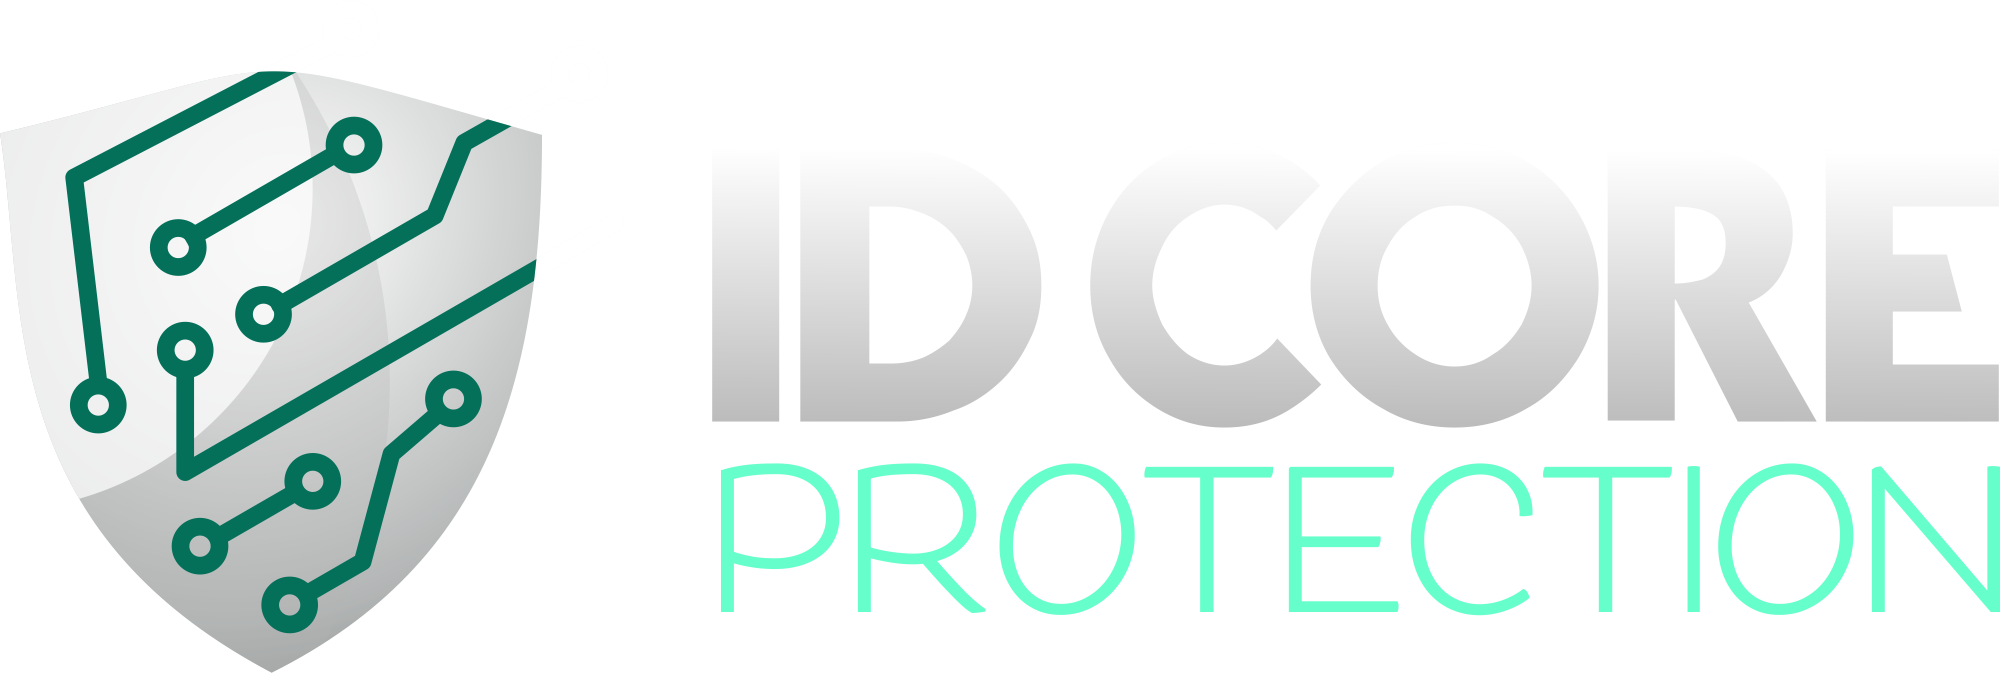 ID CORE PROTECTION